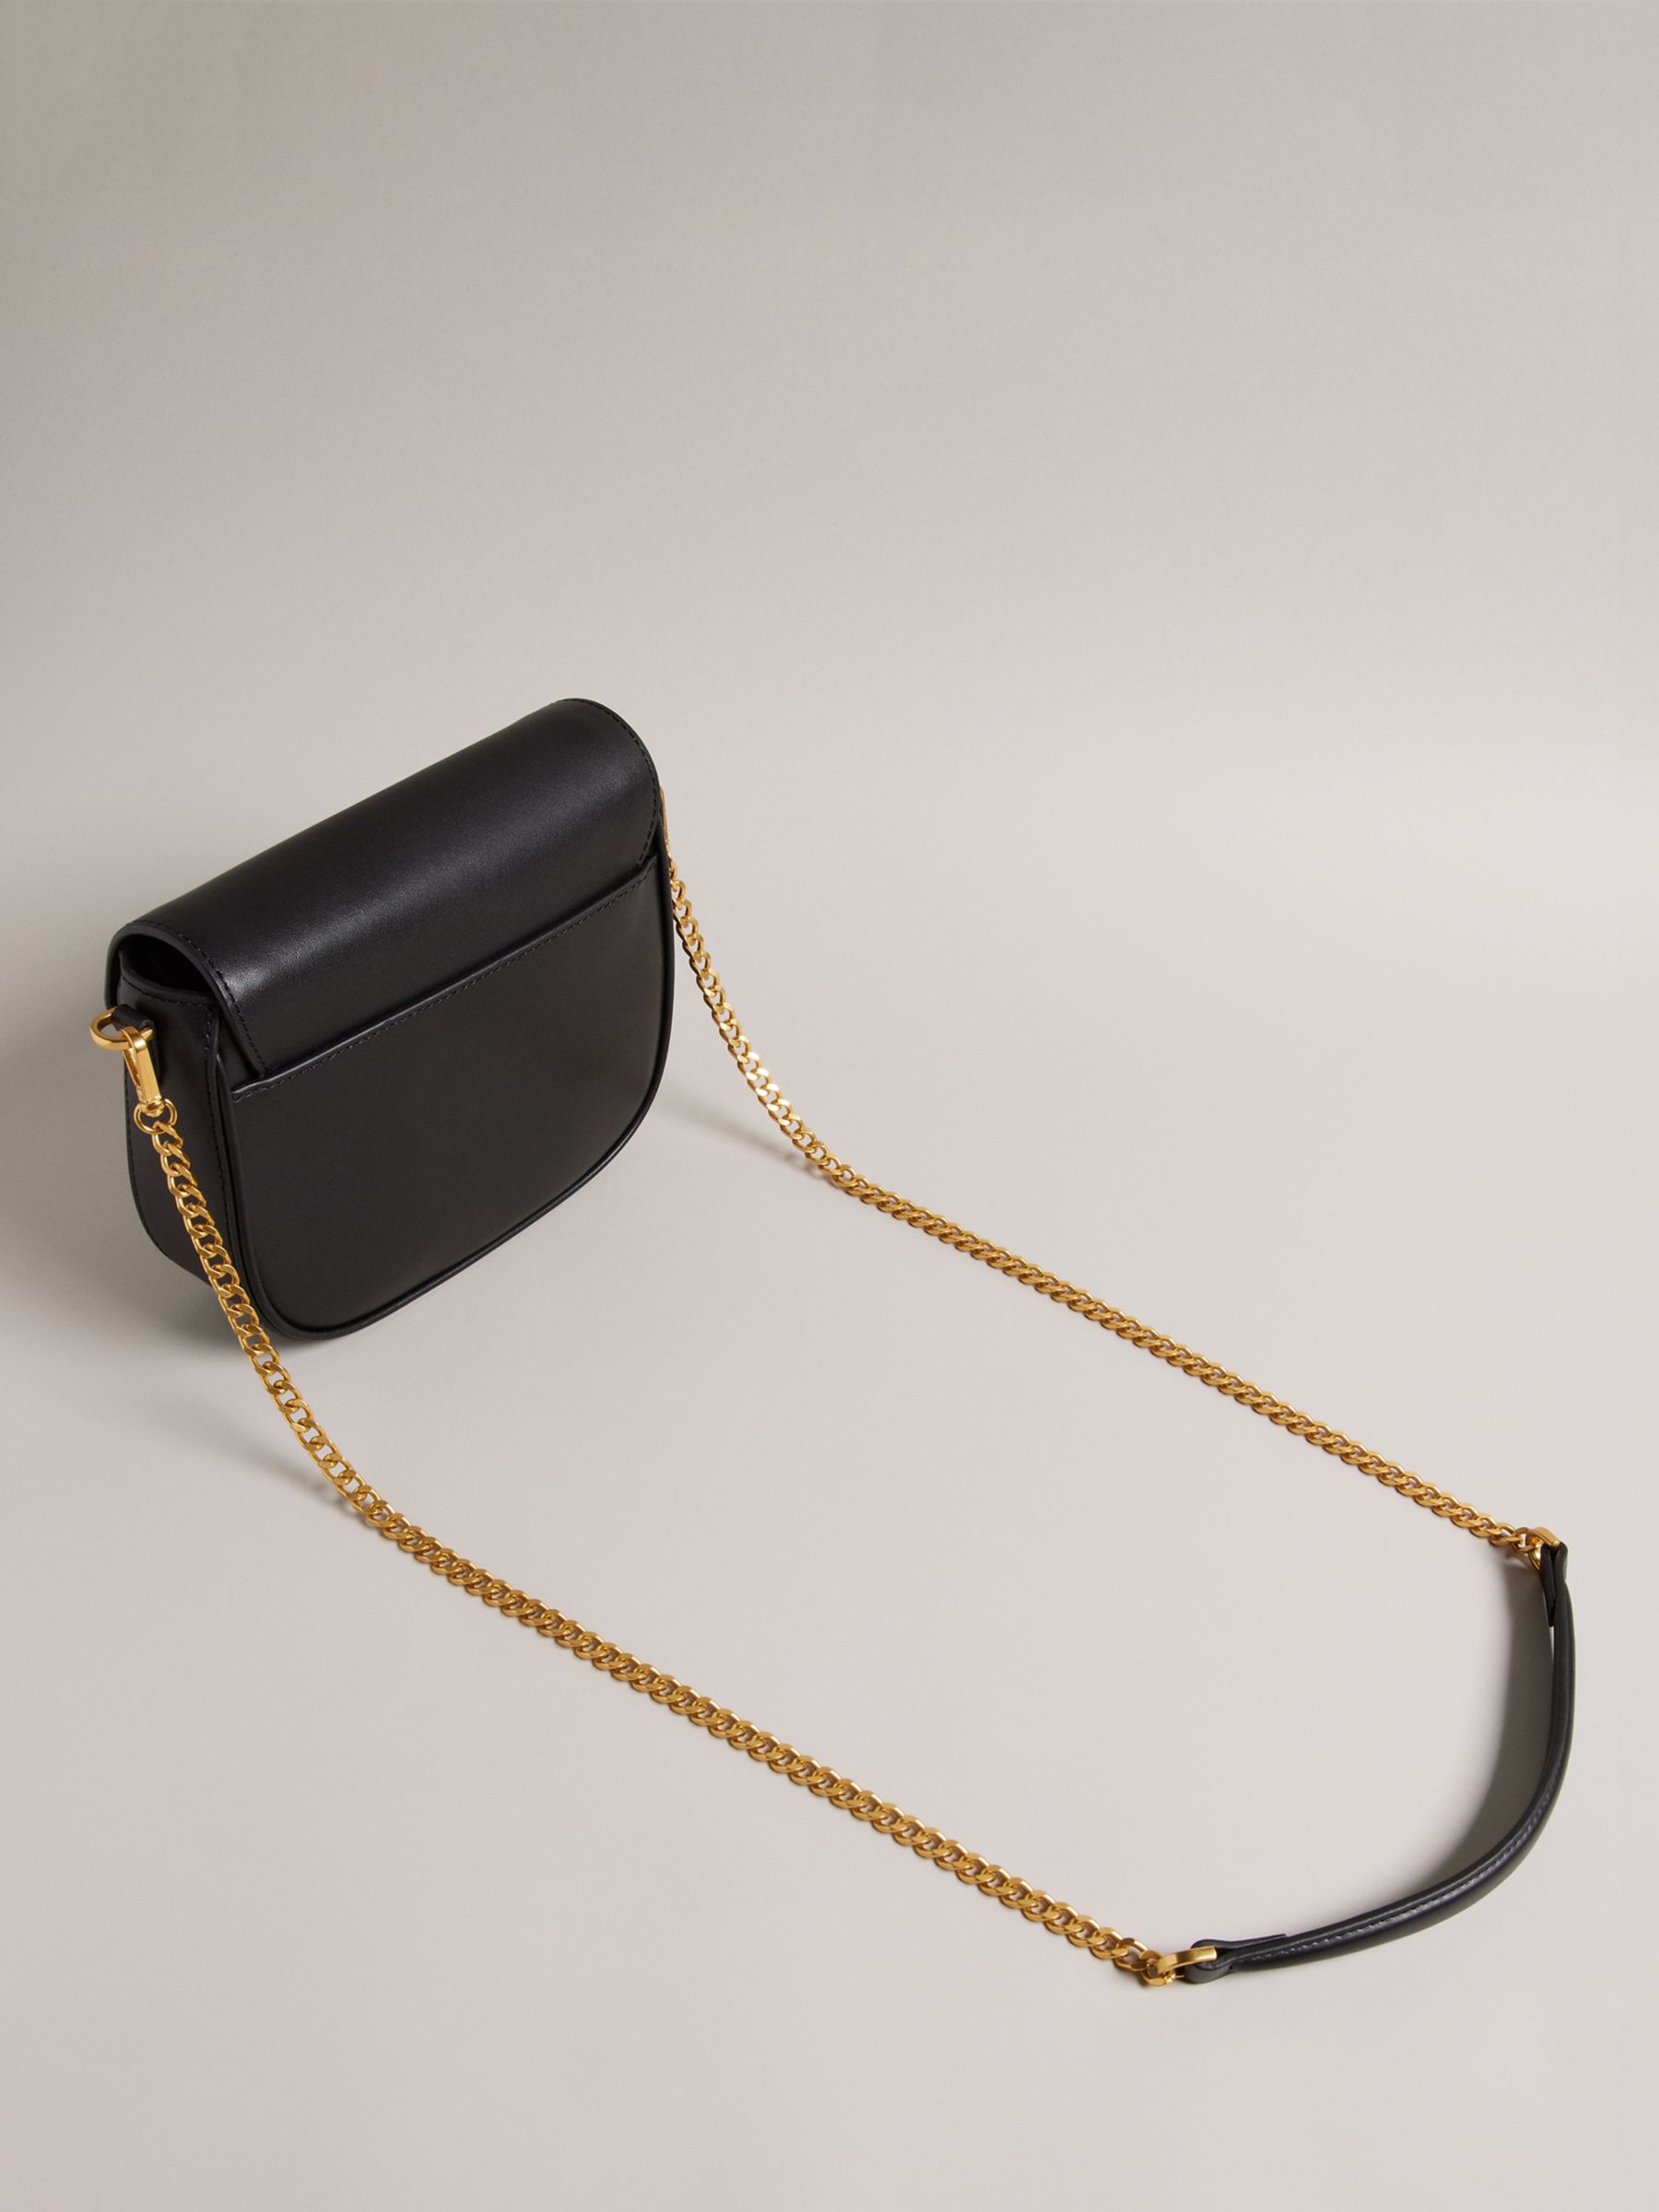 Ted Baker Esia Leather Cross Body Saddle Bag, Black, One Size